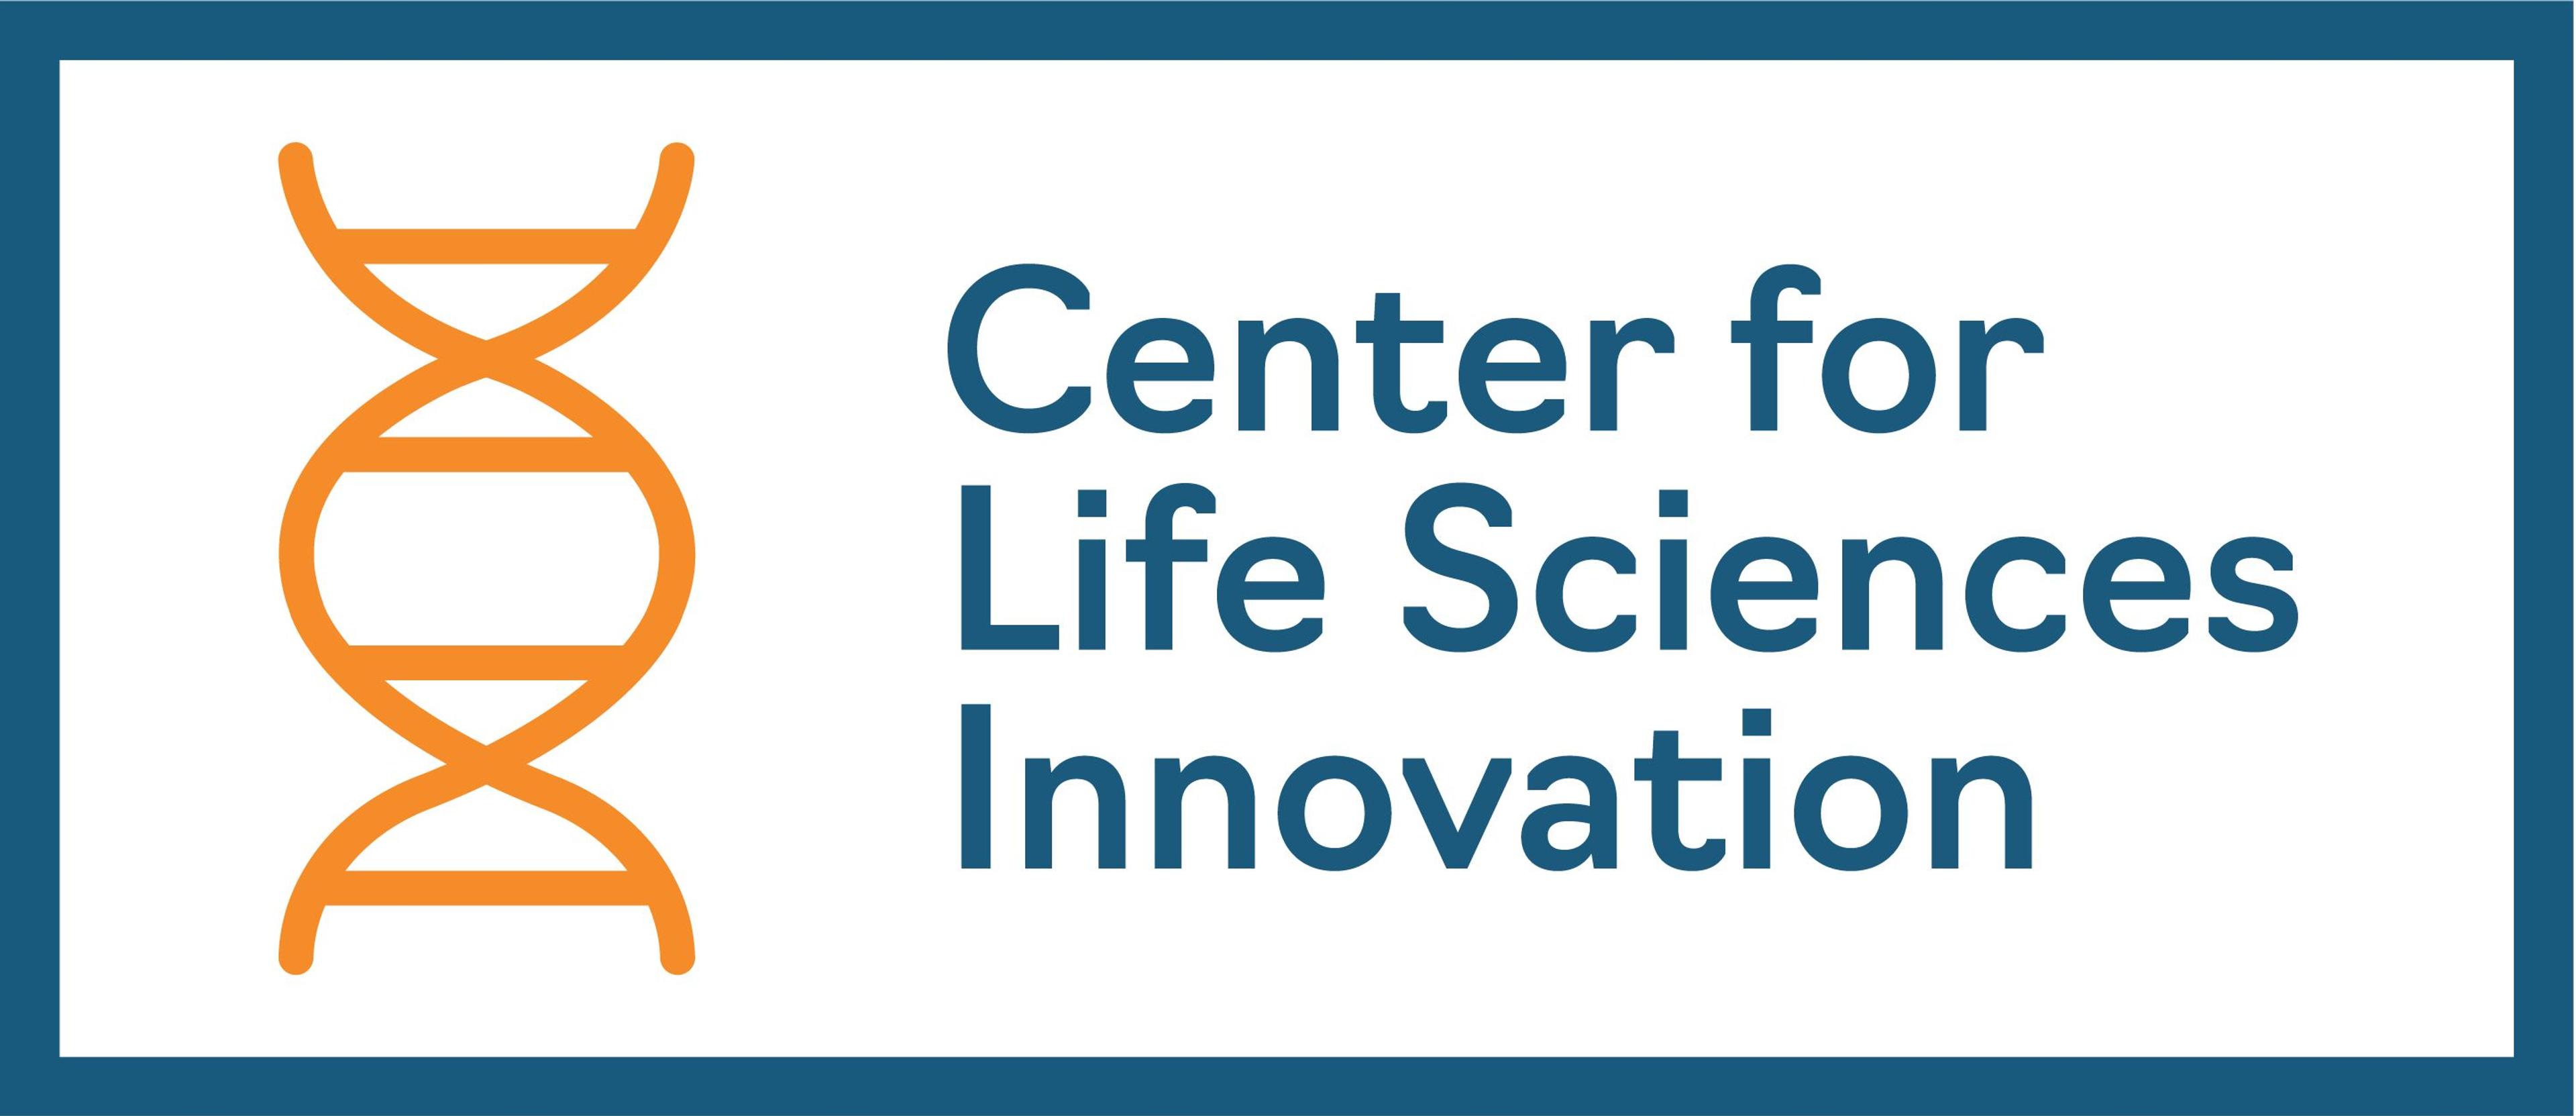 Comments to the National Institutes of Health on “Maximizing NIH’s Levers to Catalyze Technology Transfer”